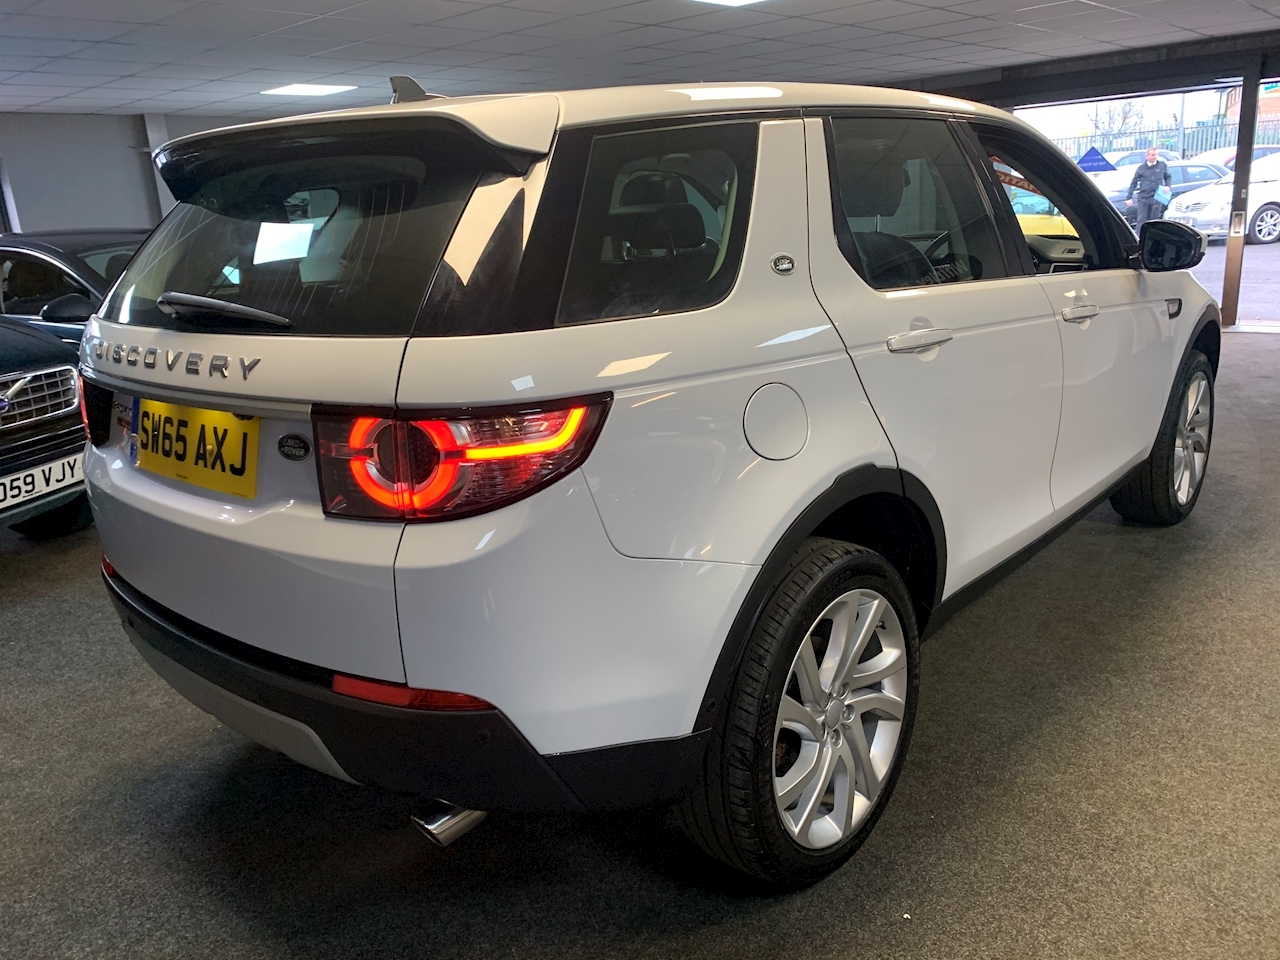 Discovery Sport Td4 Hse Luxury Estate 2.0 Automatic Diesel